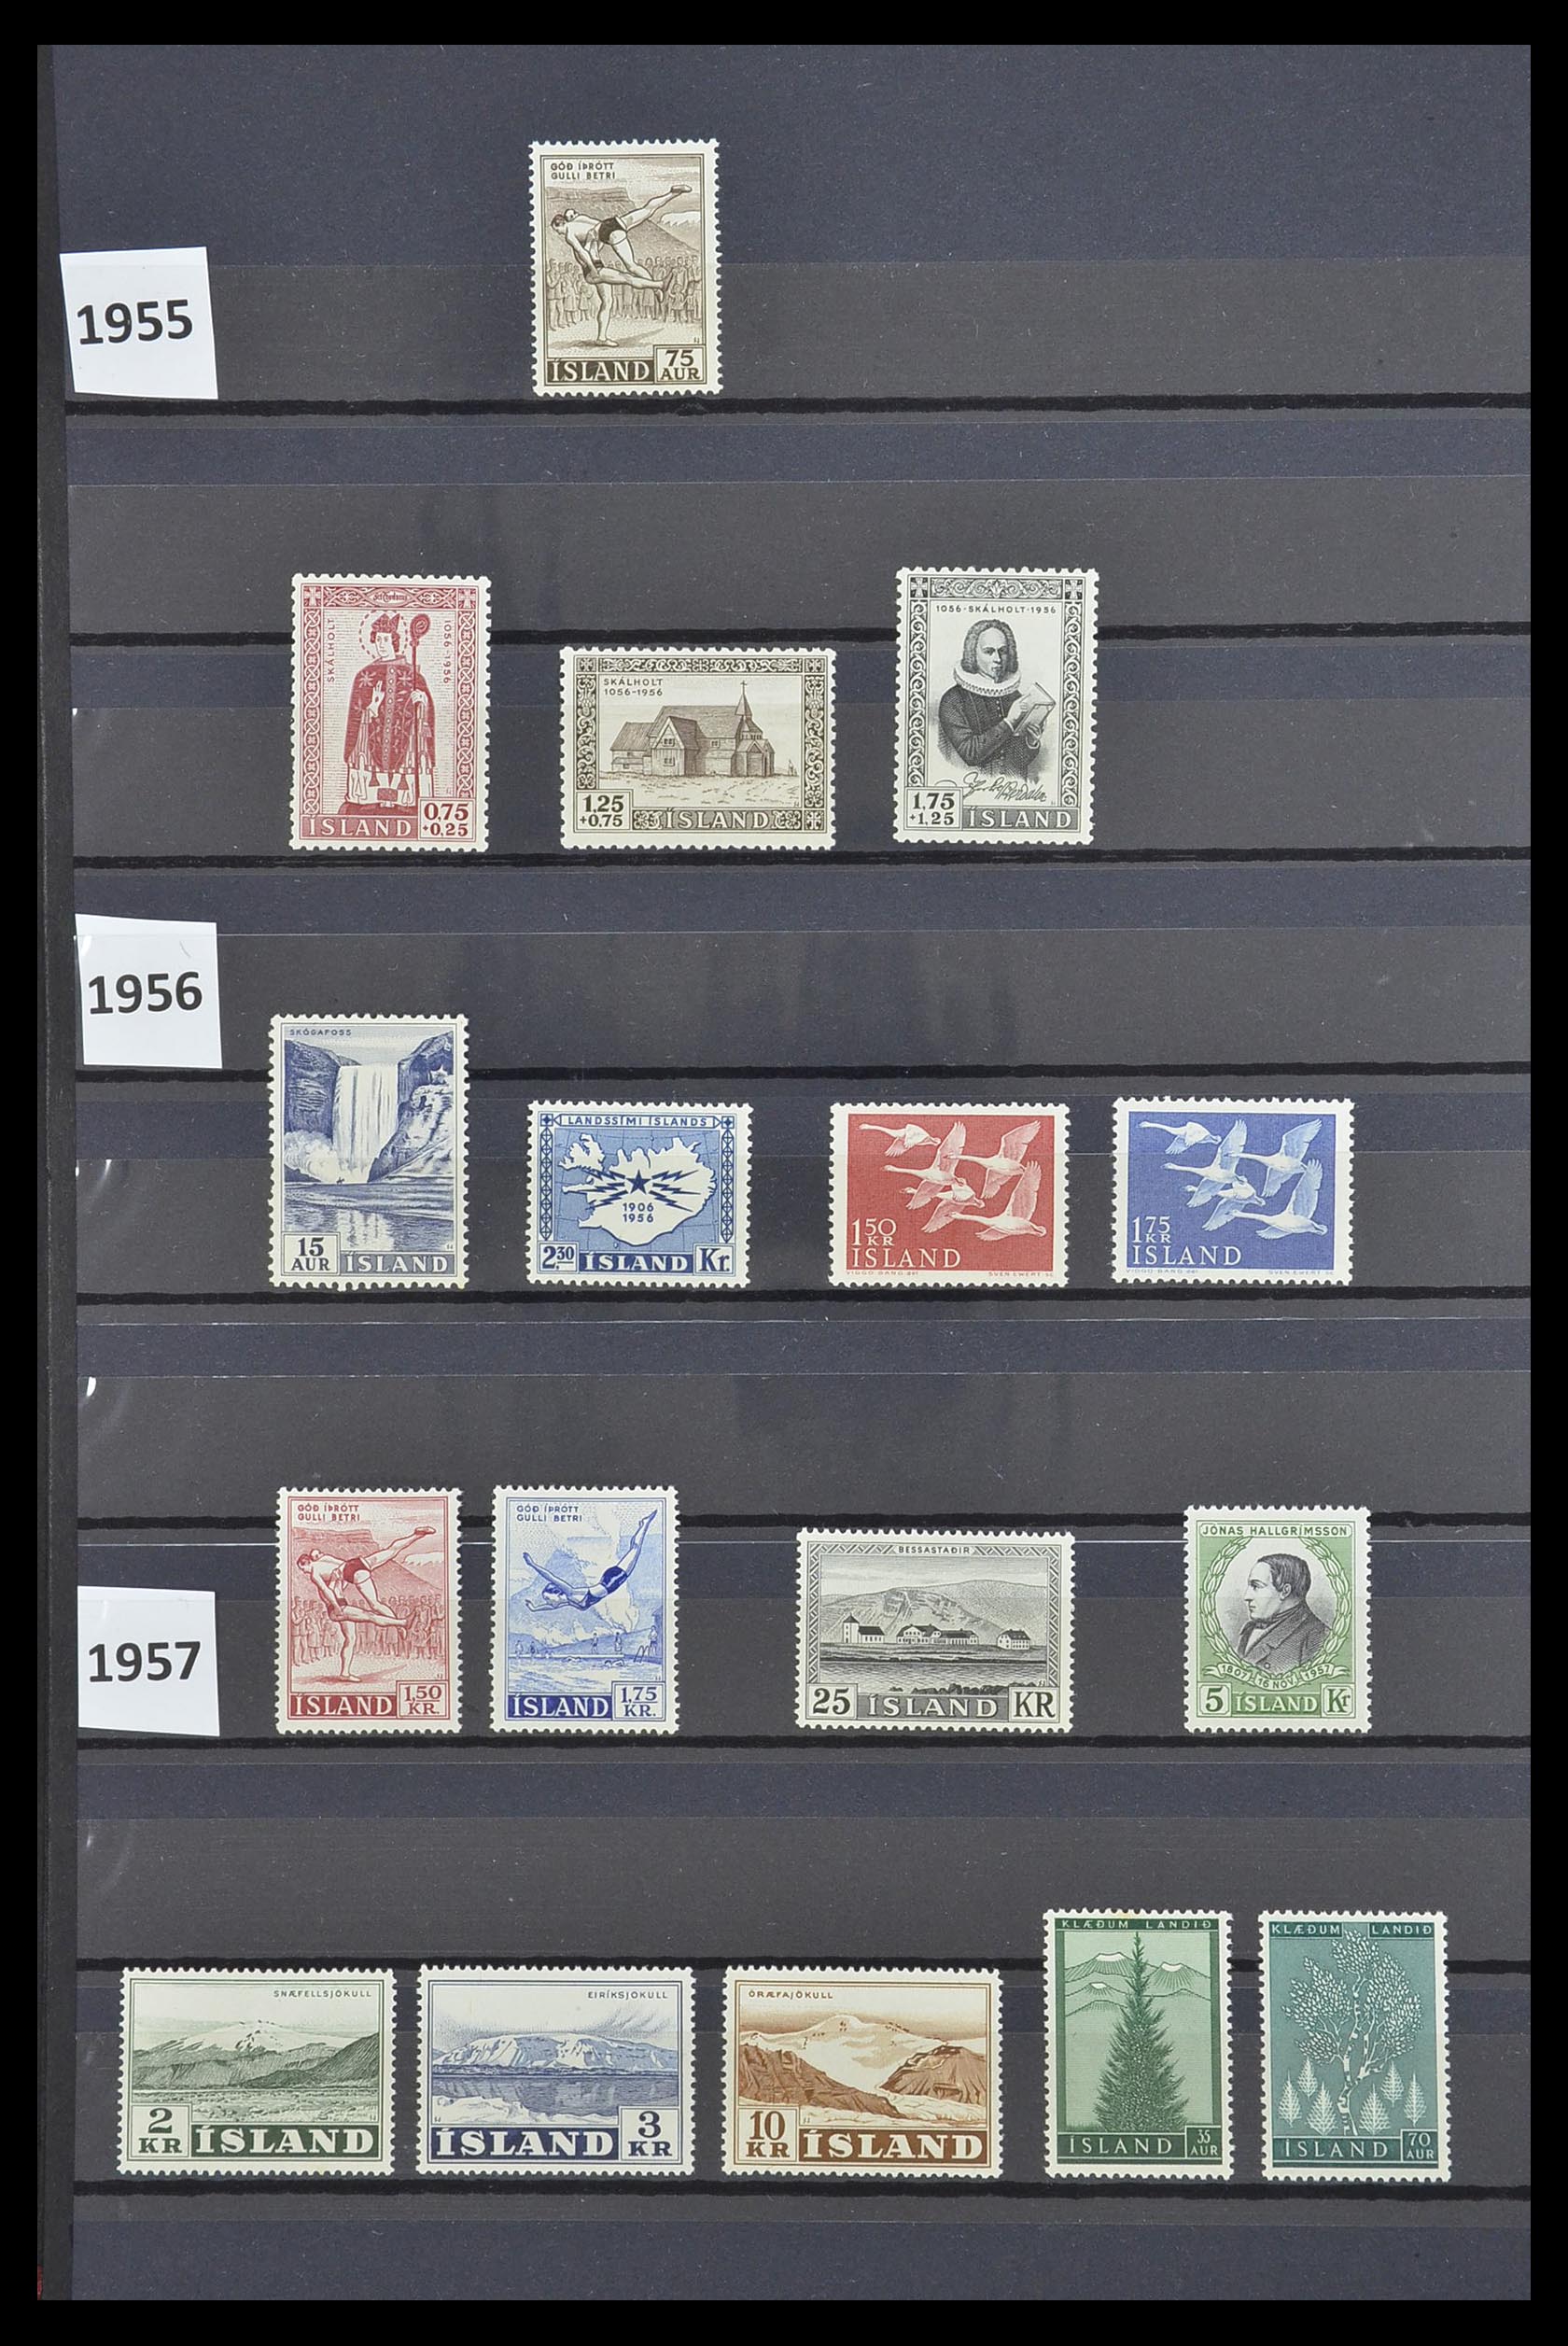 33726 089 - Stamp collection 33726 Scandinavia up to 2006.